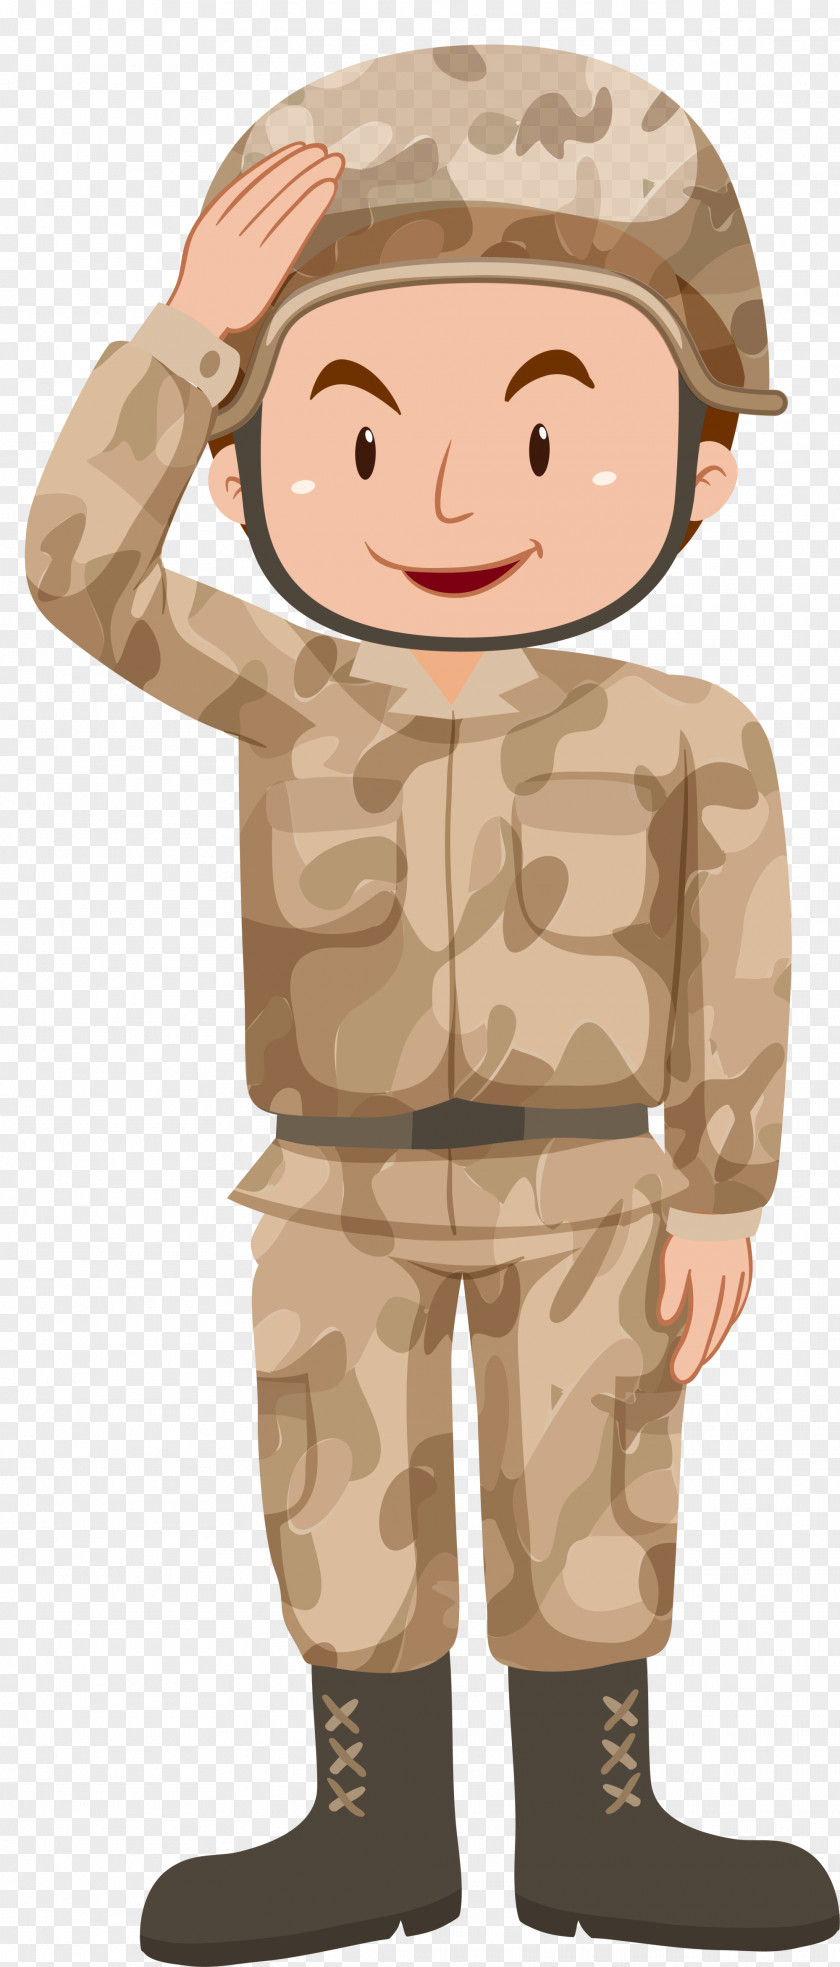 Yellow Cartoon Soldier Royalty-free Illustration PNG